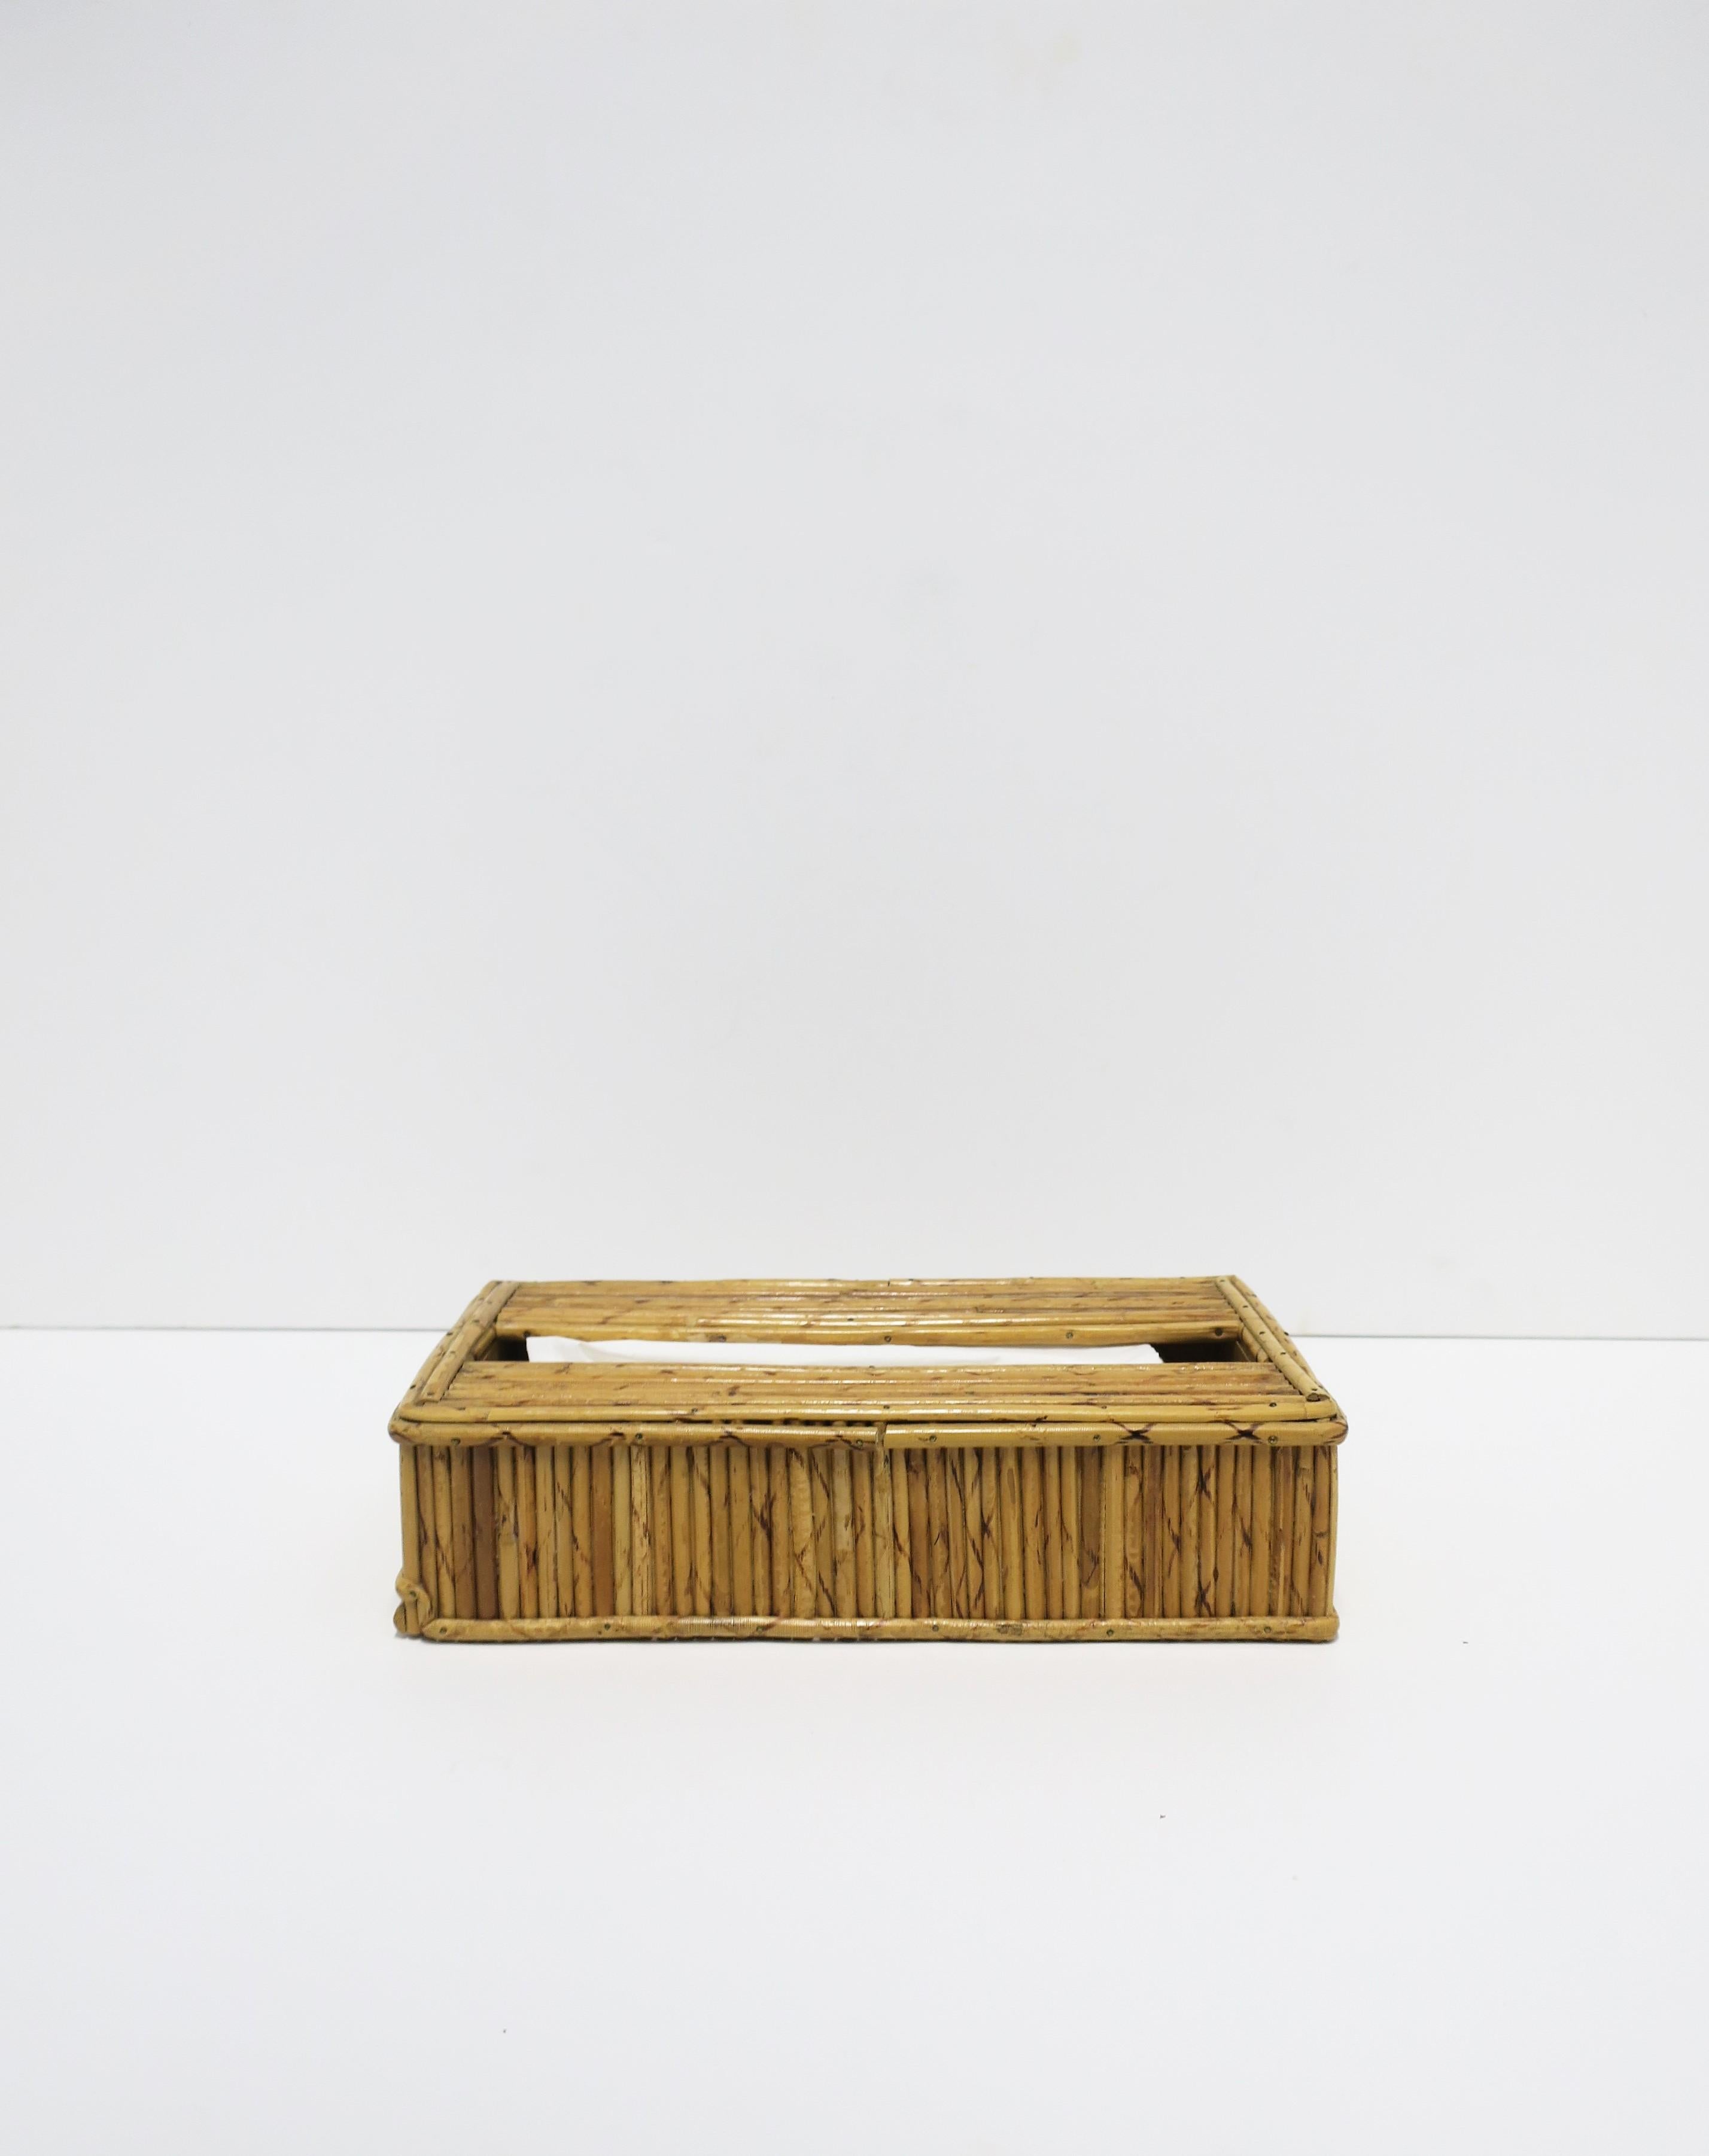 A Modern wicker pencil reed tissue box cover holder in the design style of designer Gabriella Crespi, circa 1960s, 1970s, English ruled Hong Kong. A great piece of any bathroom, office, library, bedroom, pool house, etc. Fits standard size tissues